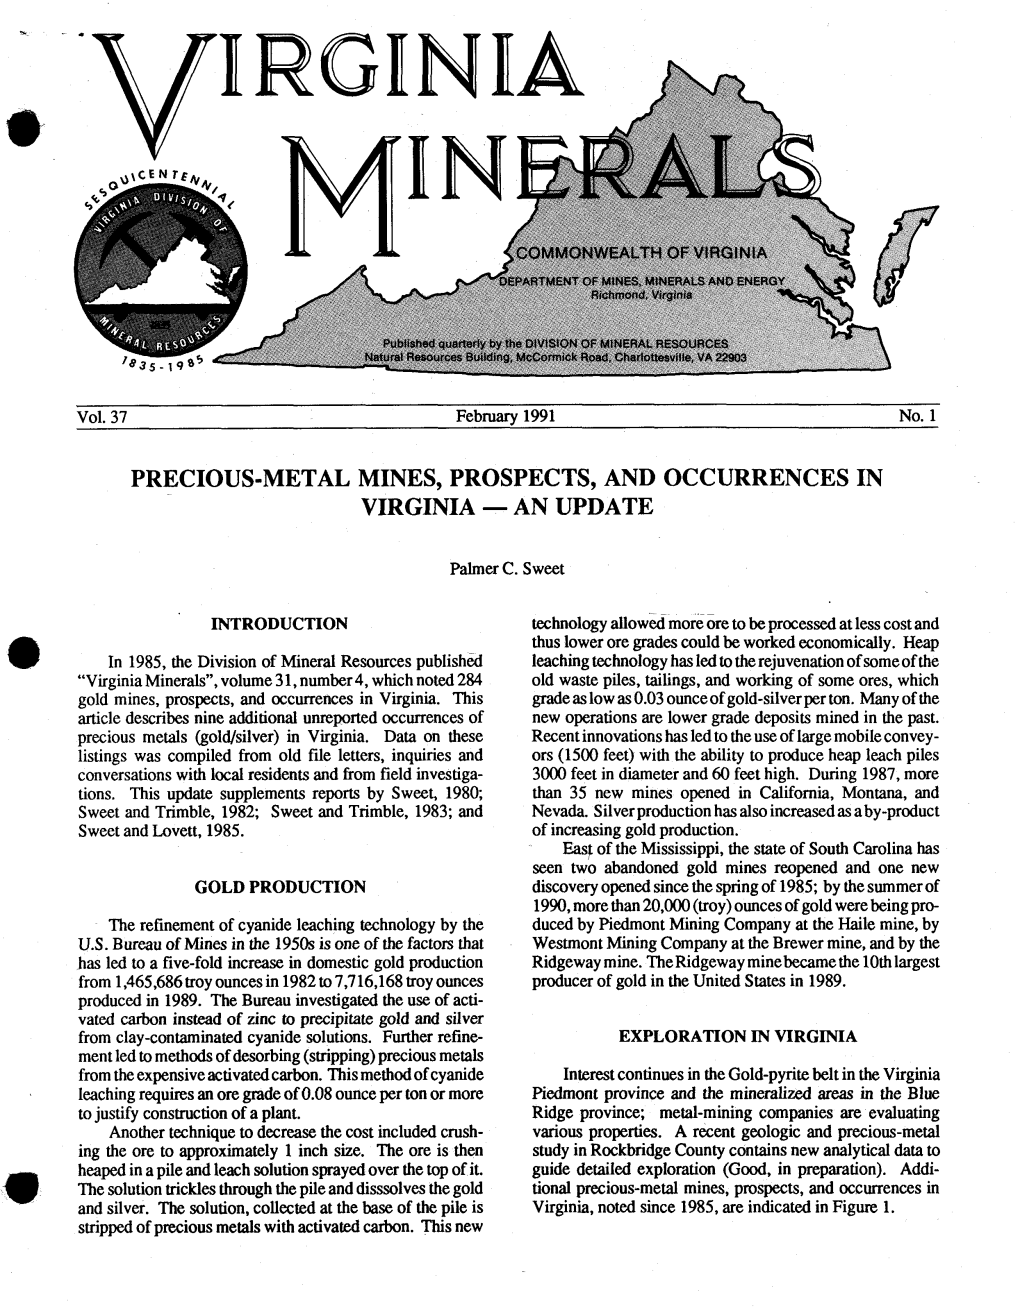 Precious-Metal Mines, Prospects, and Occurrences in Virginia - an Update